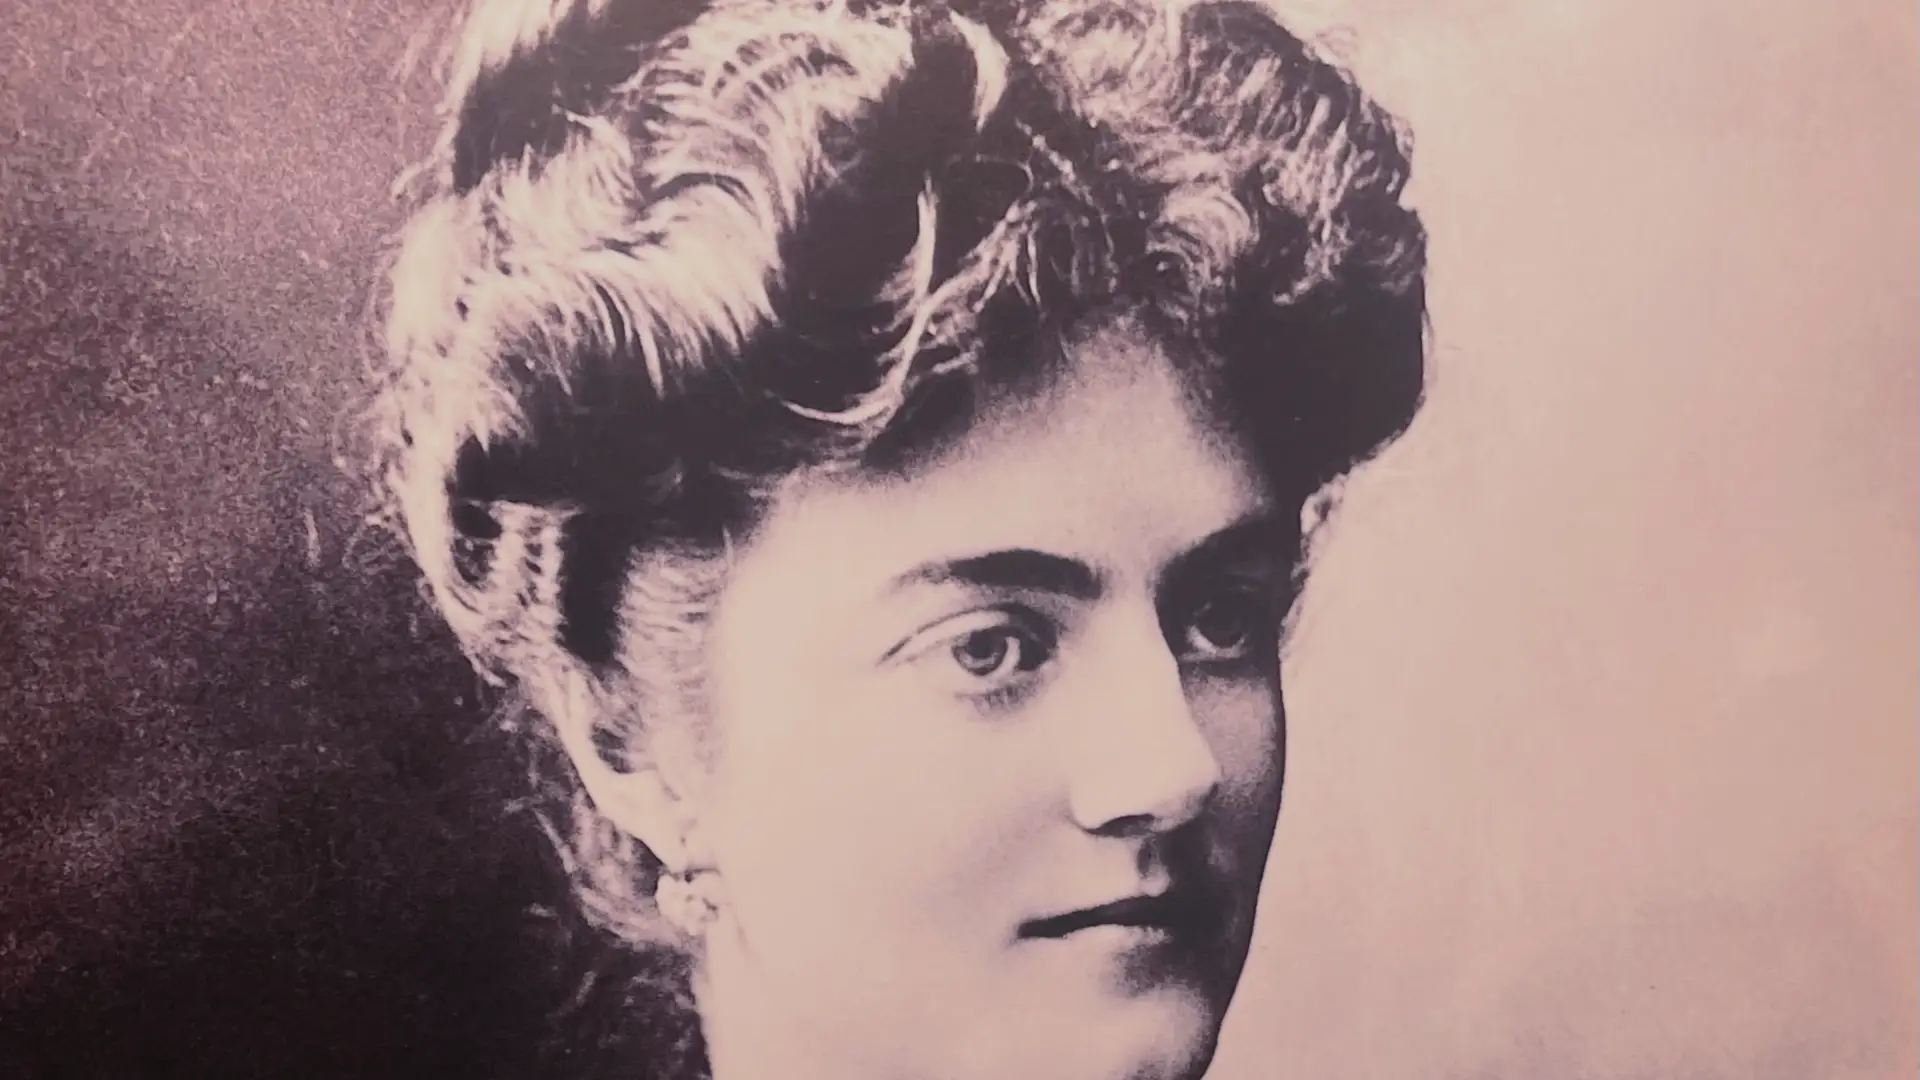 Vintage black and white portrait of a woman with elaborately styled hair, looking to the side, captured in a soft, grainy texture suggestive of early photographic techniques.